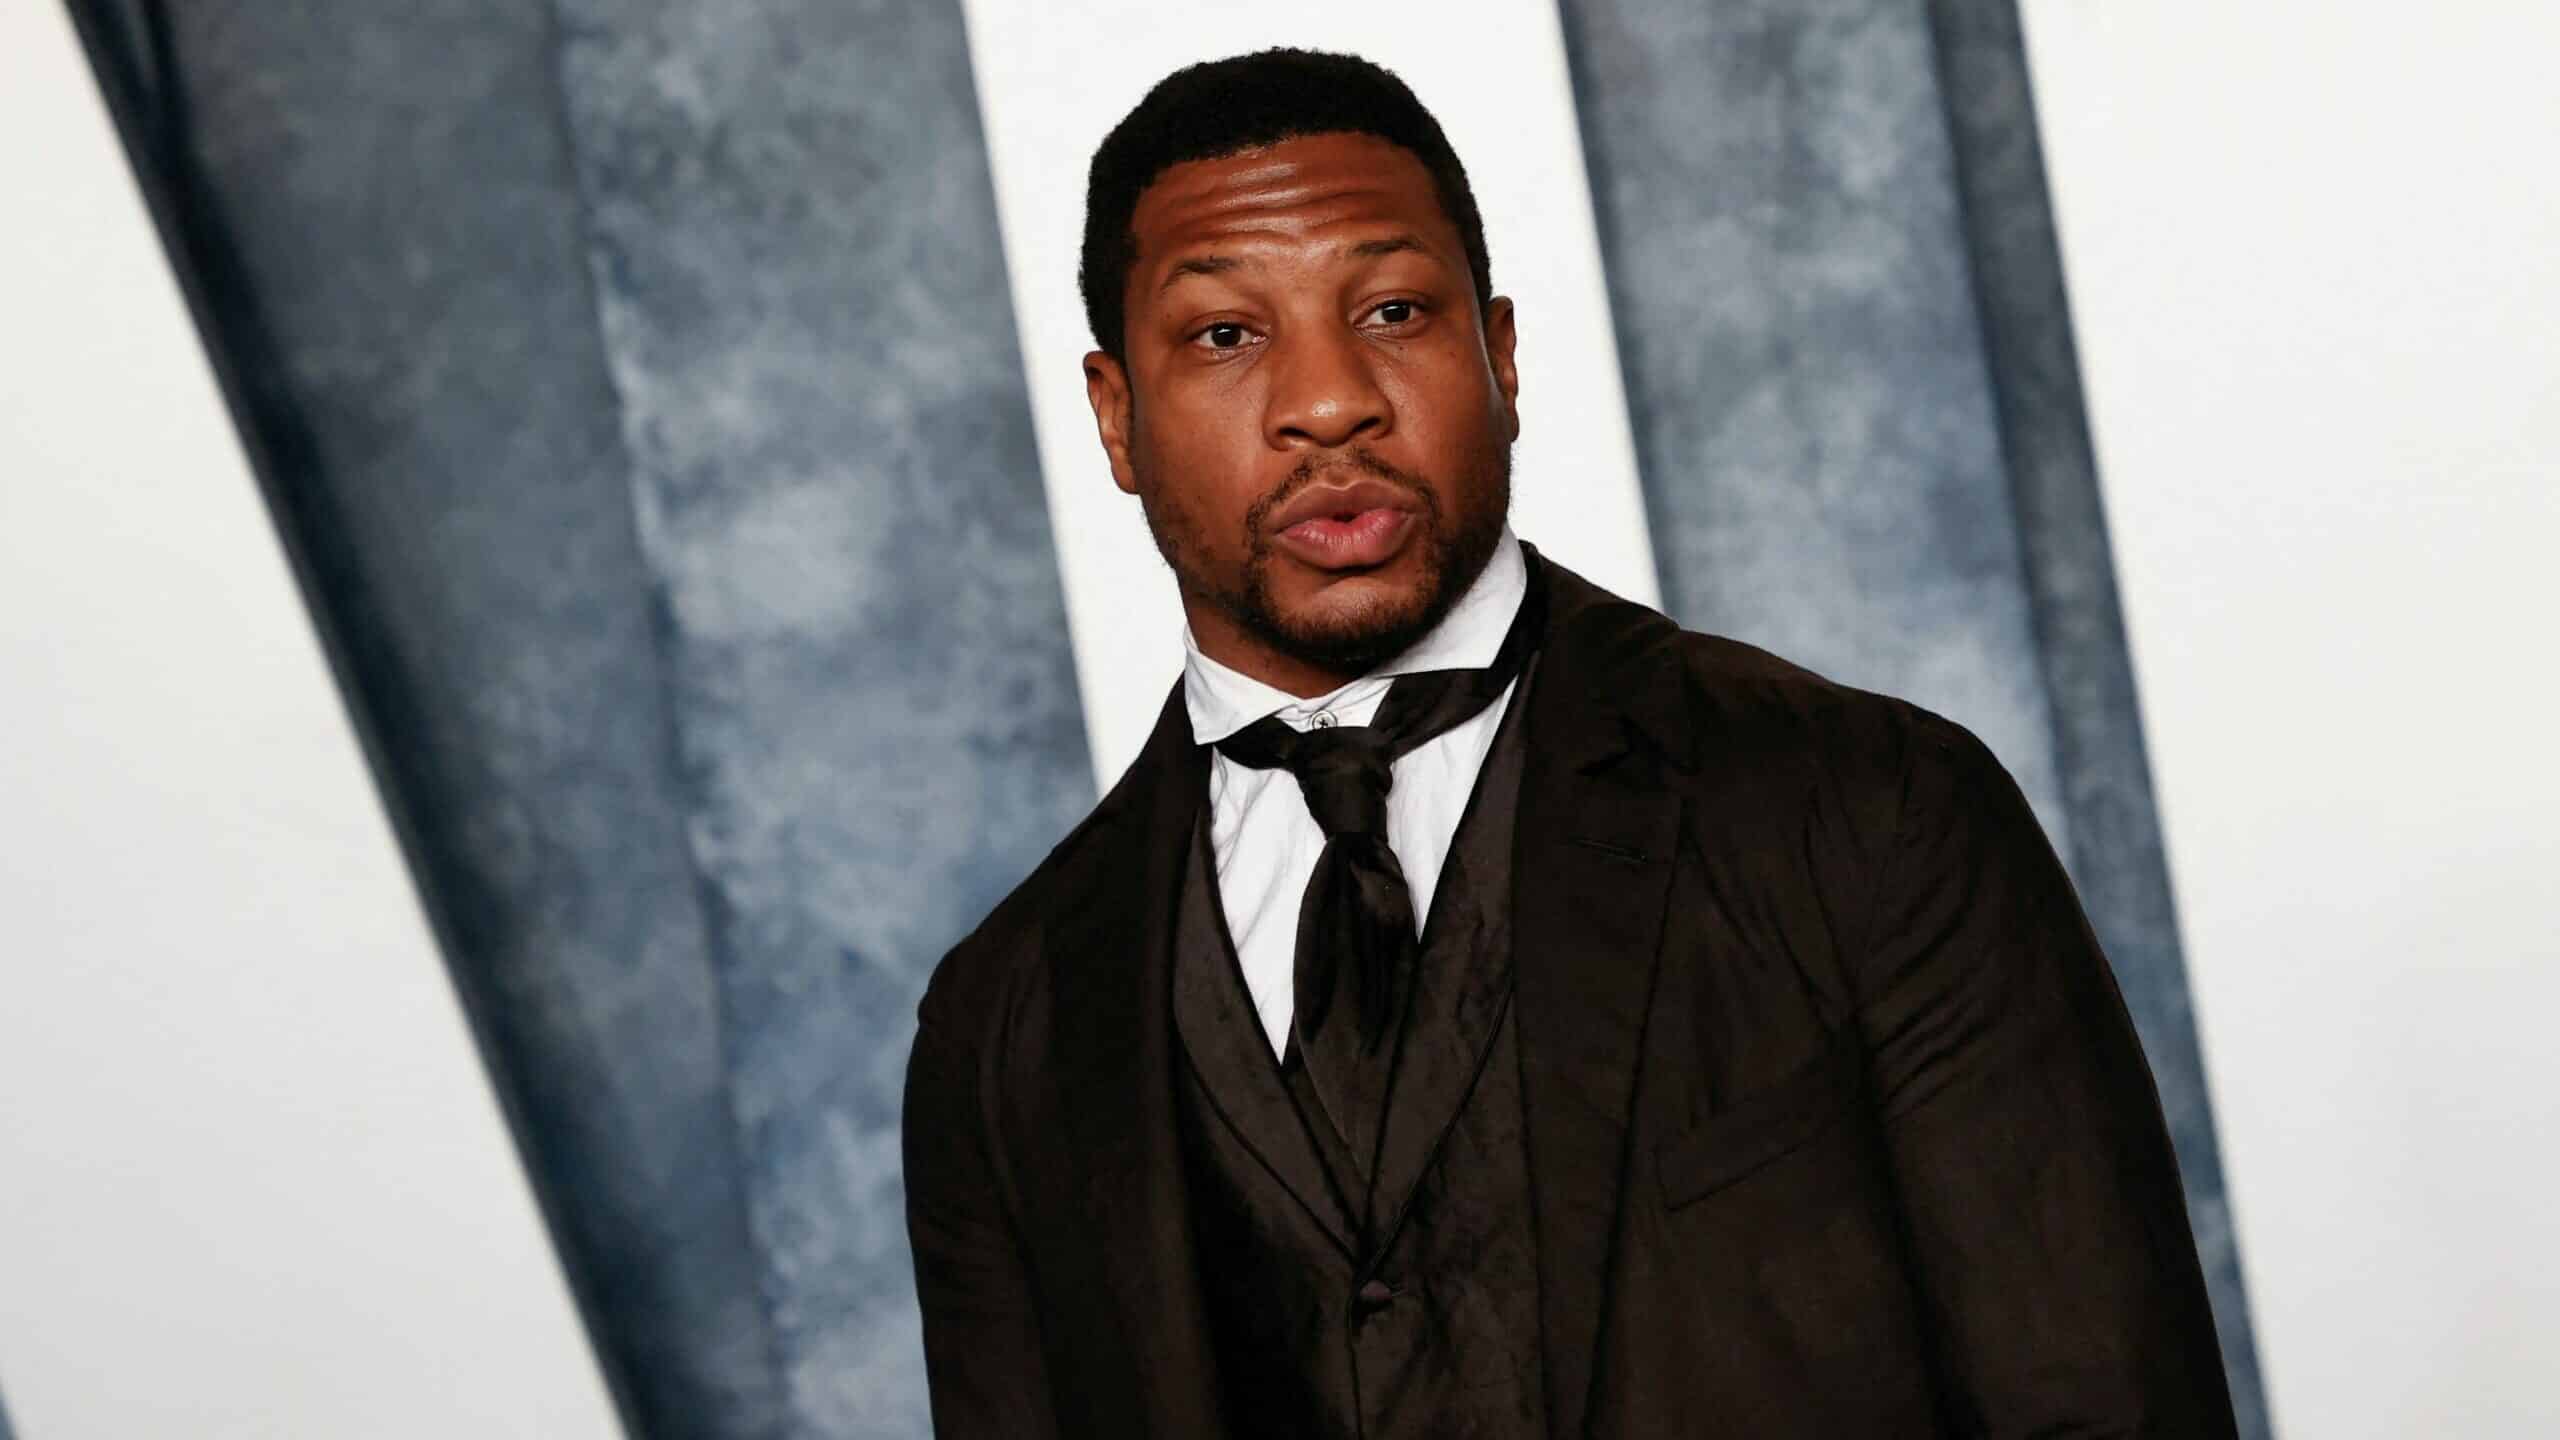 US actor Jonathan Majors attends the Vanity Fair 95th Oscars Party at the The Wallis Annenberg Center for the Performing Arts in Beverly Hills, California on March 12, 2023. (Photo by Michael TRAN / AFP)